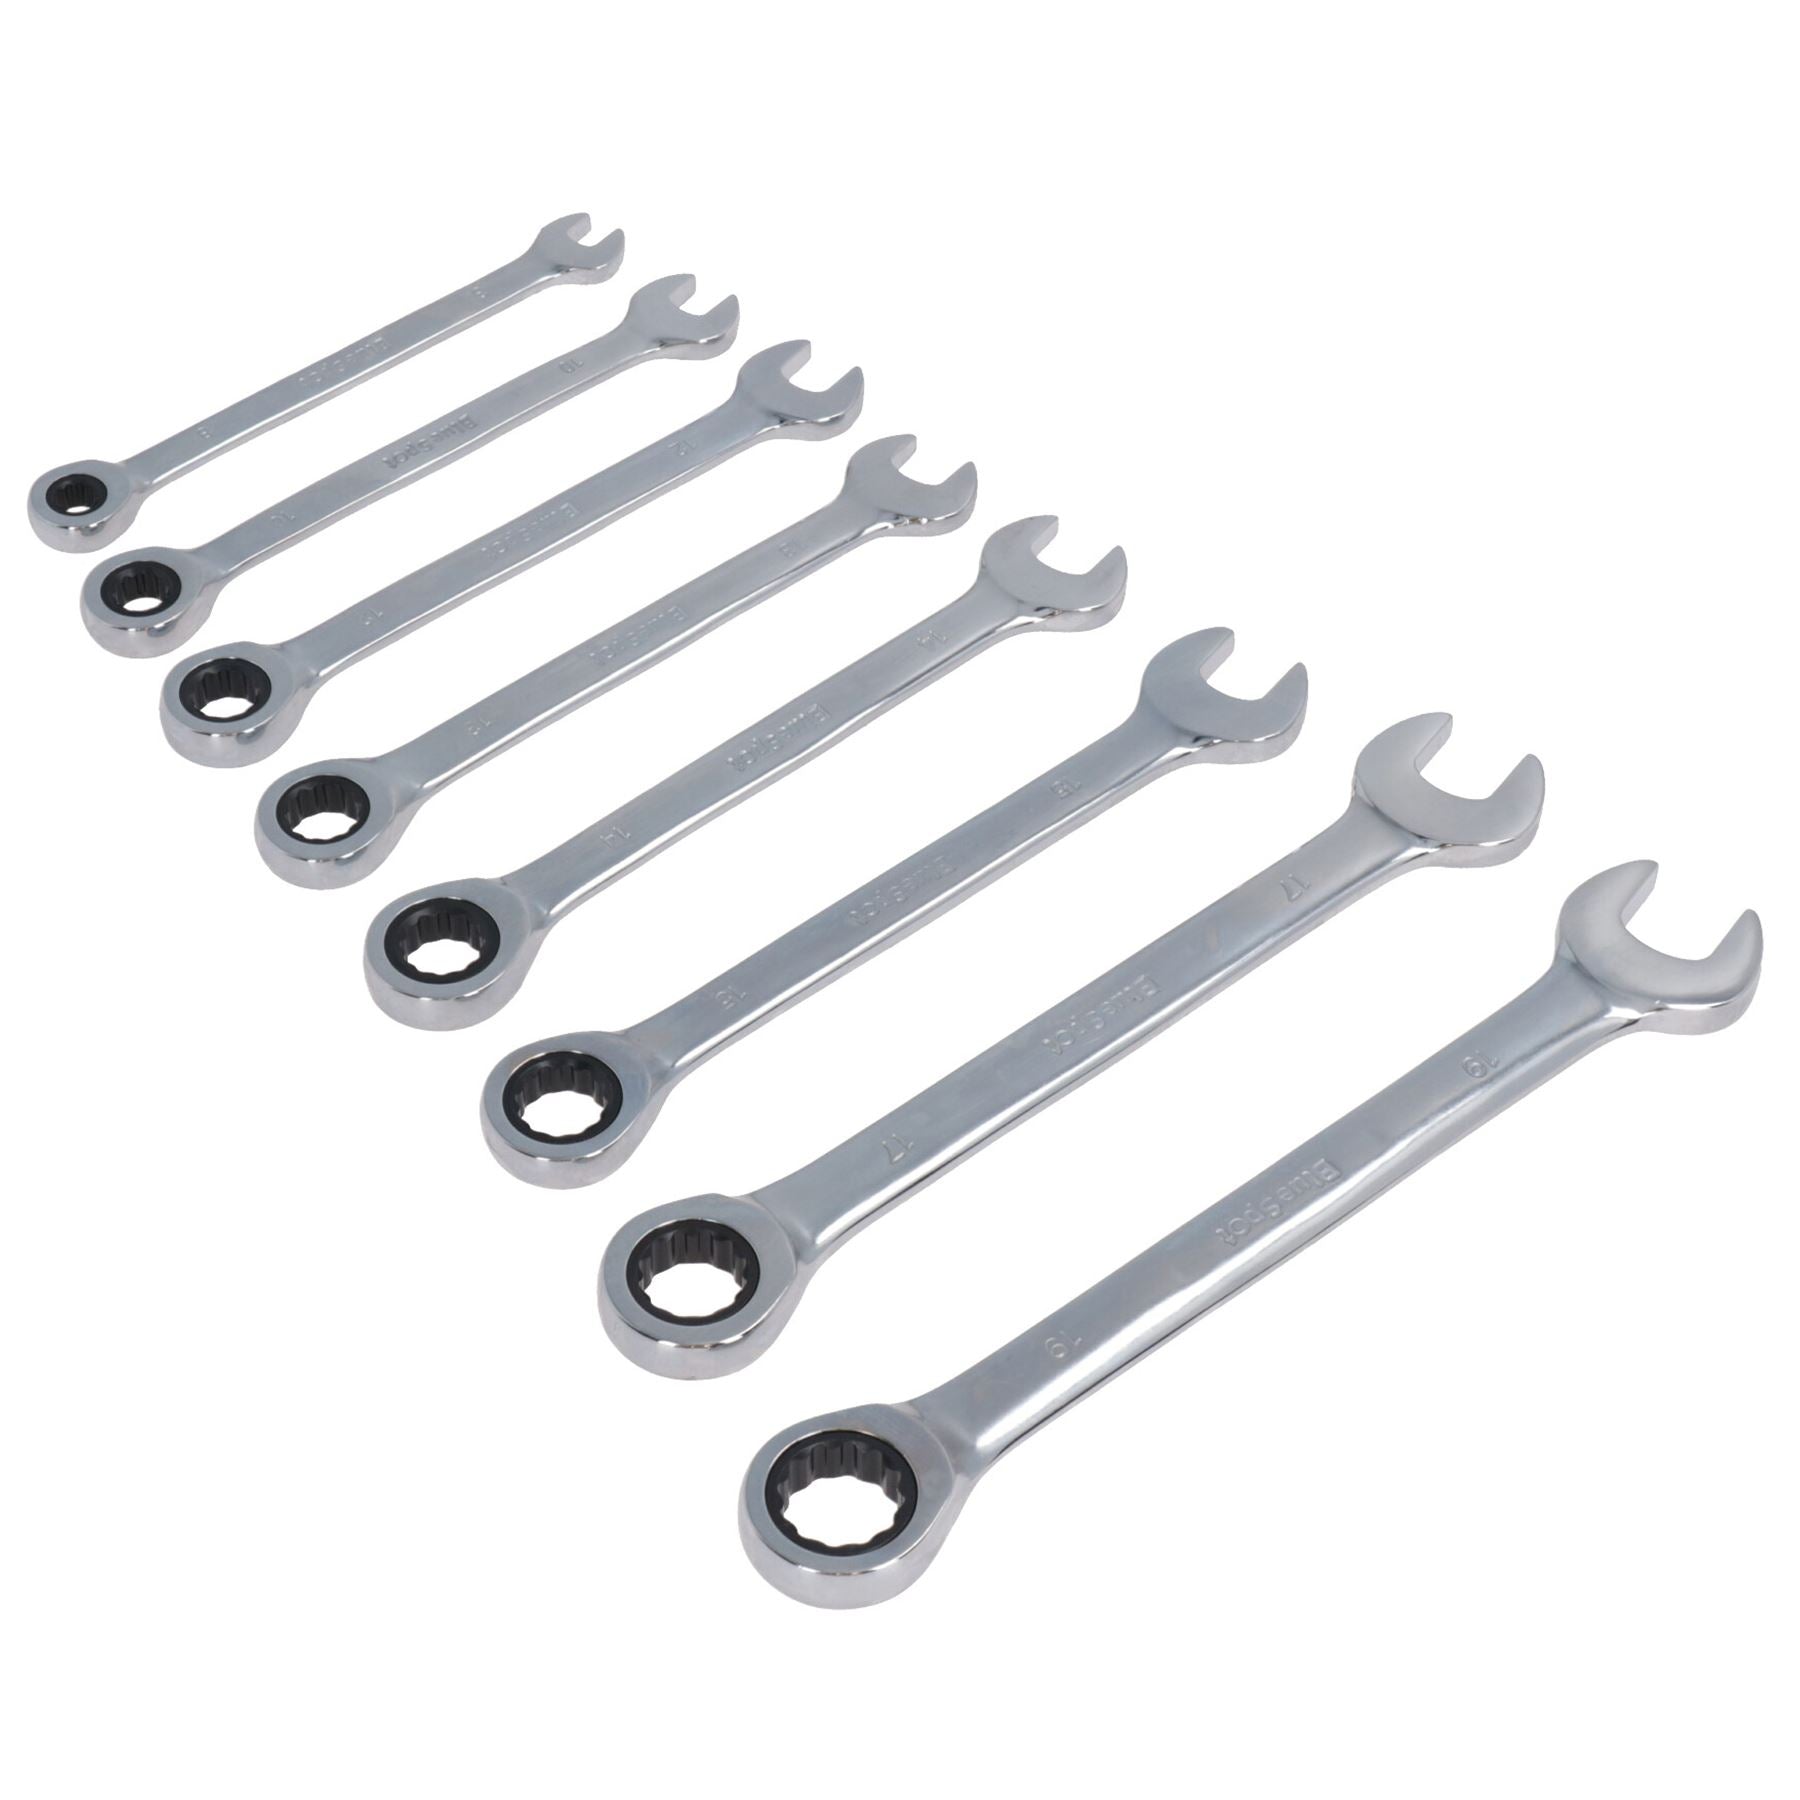 Metric 8mm – 19mm Ratchet Combination Spanner Wrench 8pc Set 72 Teeth